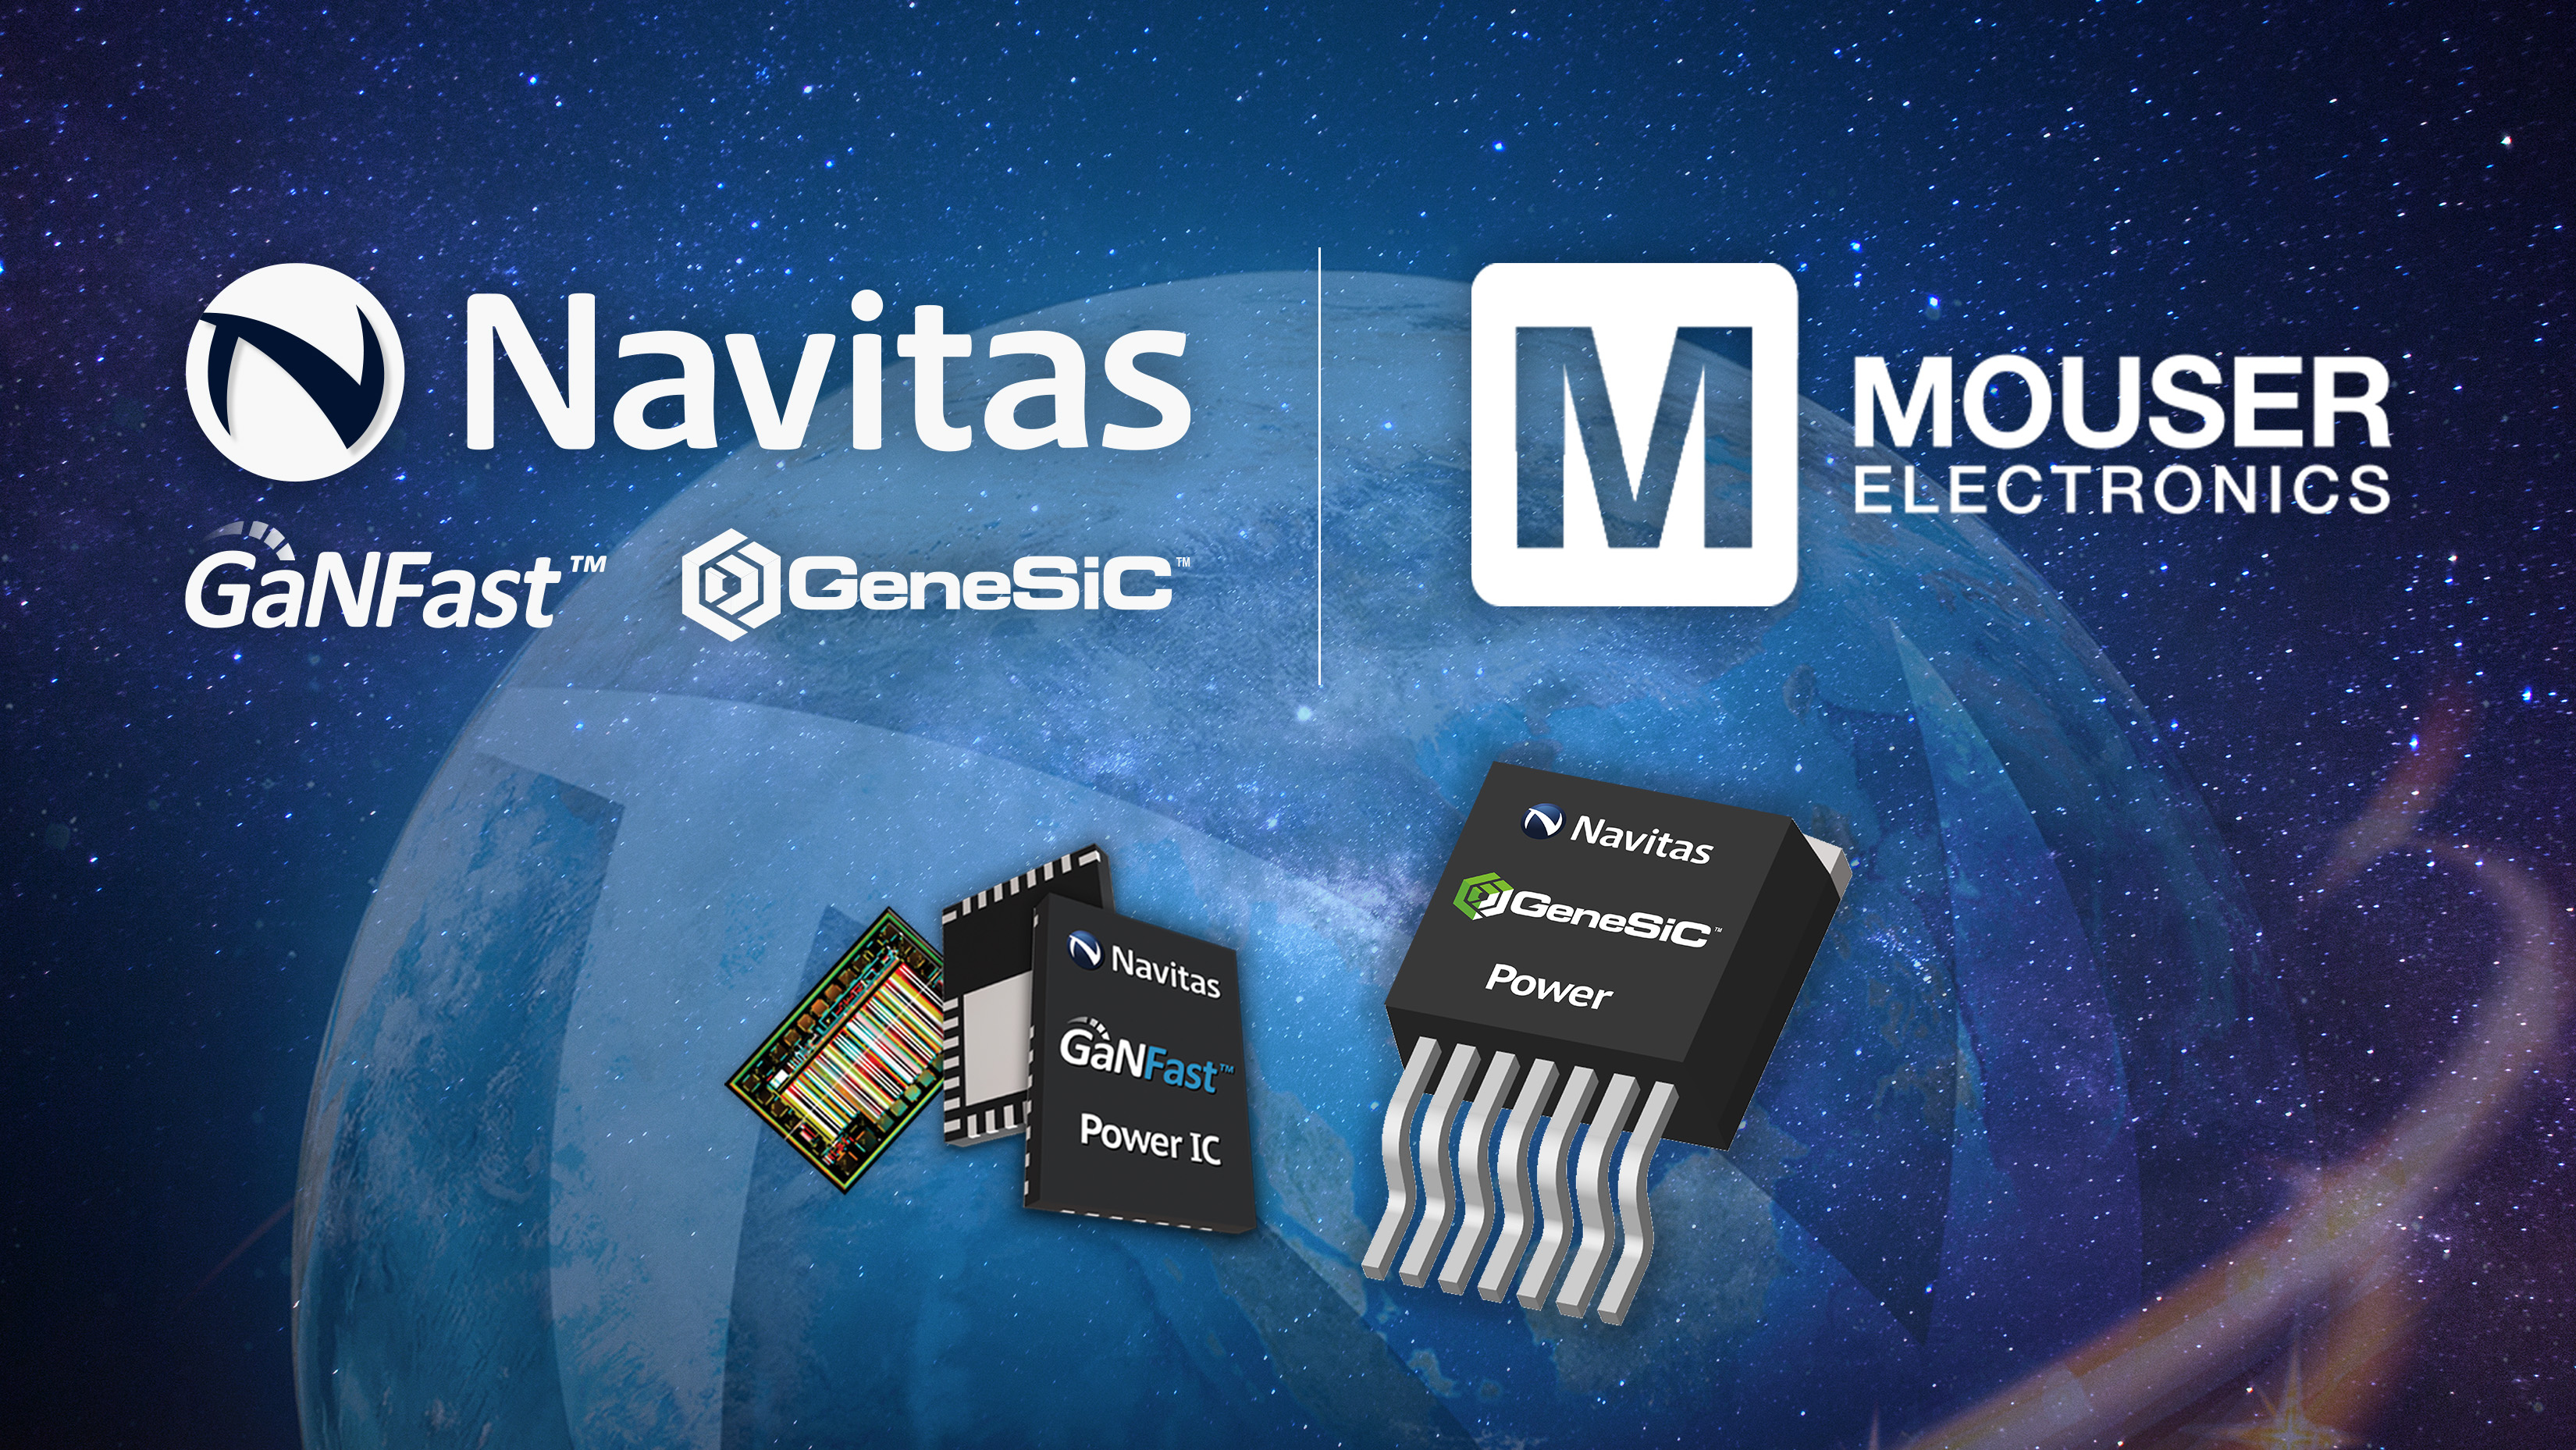 Navitas Agreement with Mouser Electronics Covers Complete Portfolio of Wide Band-Gap Semiconductors